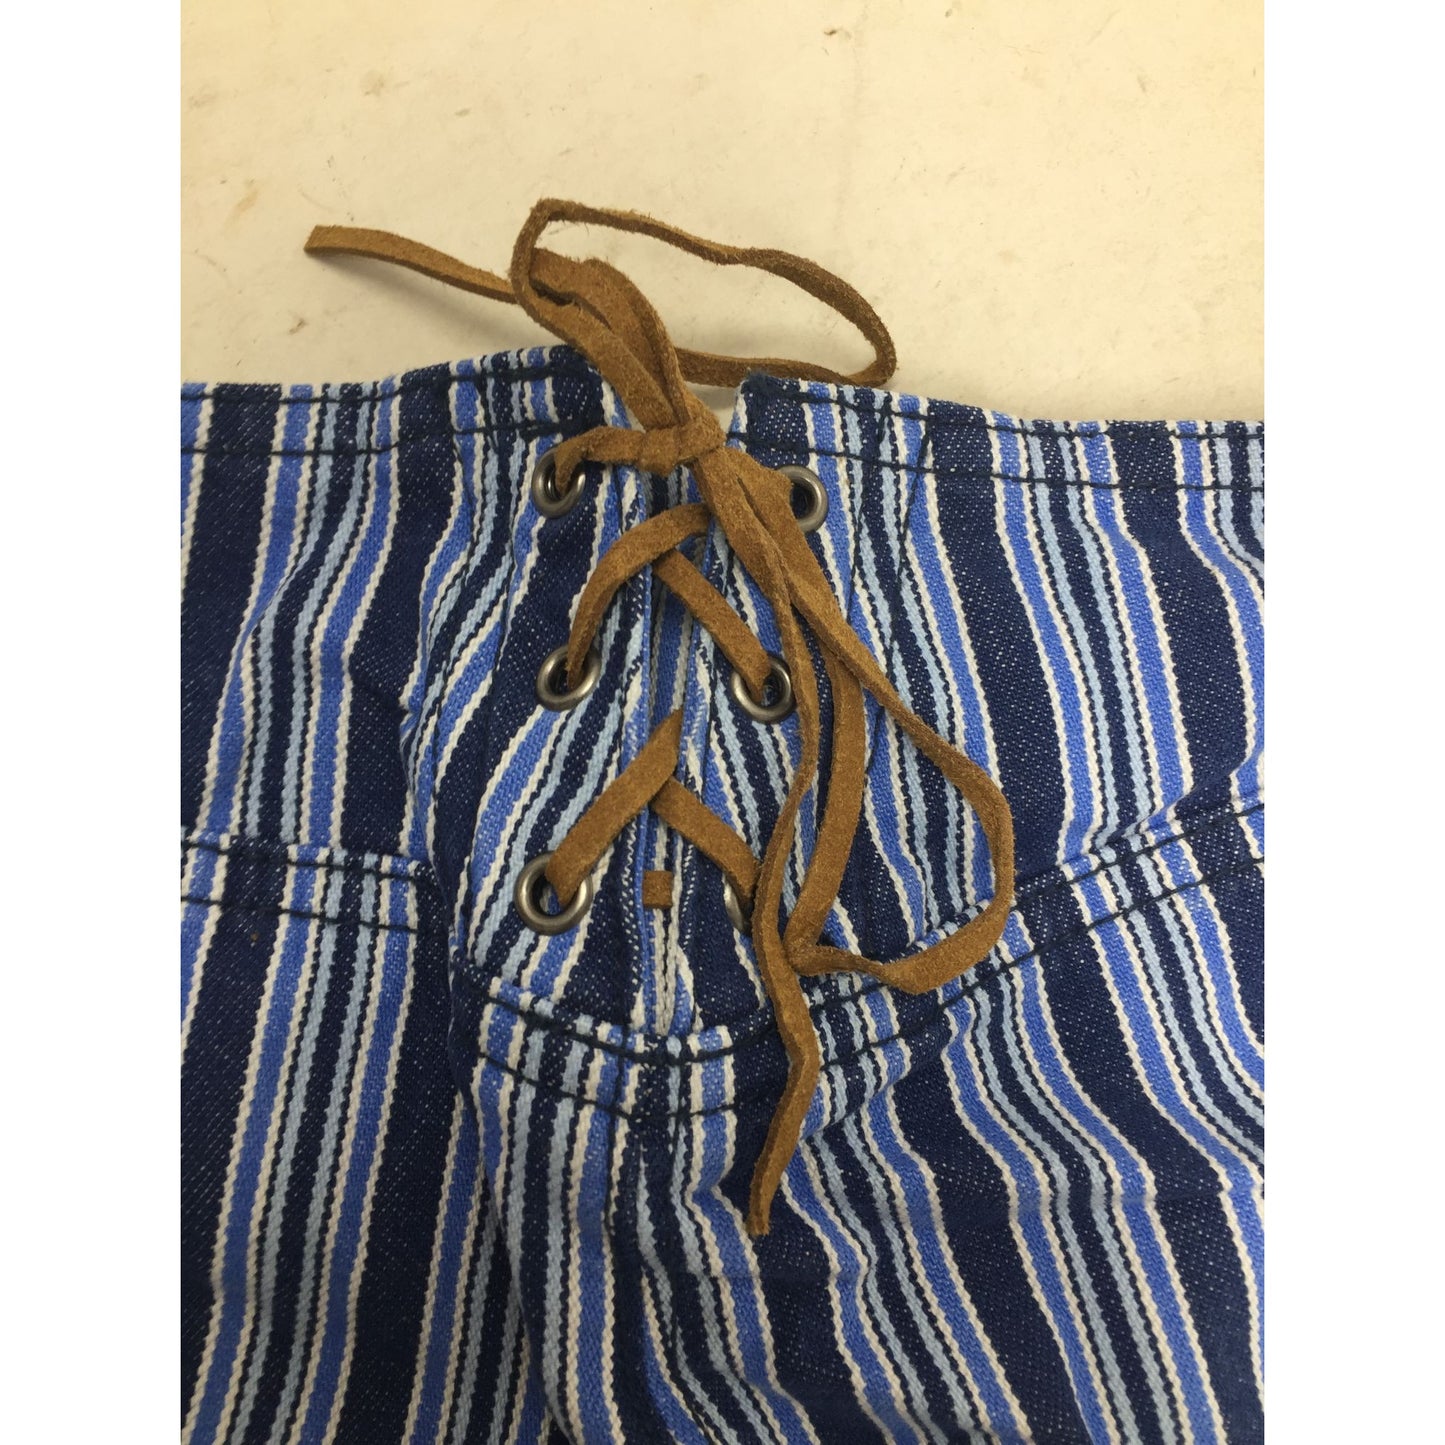 Abercrombie Girls Size 10 Striped Blue Super Low Rise Capri Pants New with Tags